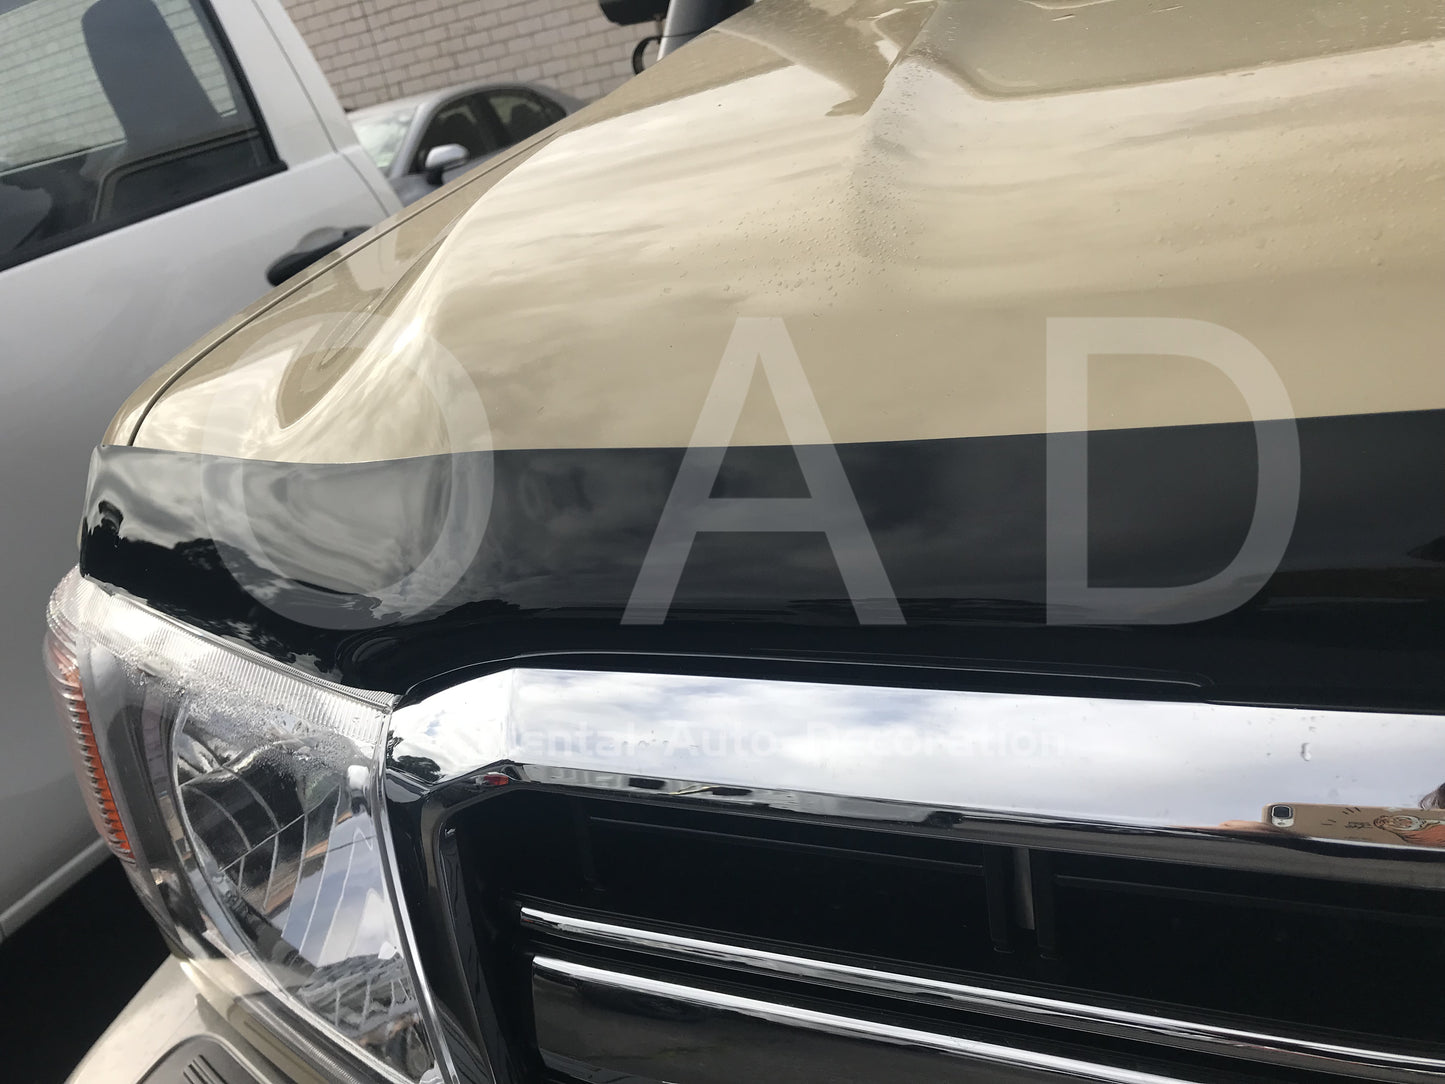 PICK UP ONLY!!! Bonnet Protector for Toyota Landcruiser Land Cruiser 70 76 78 79 LC70 LC76 LC78 LC79 2007-2016